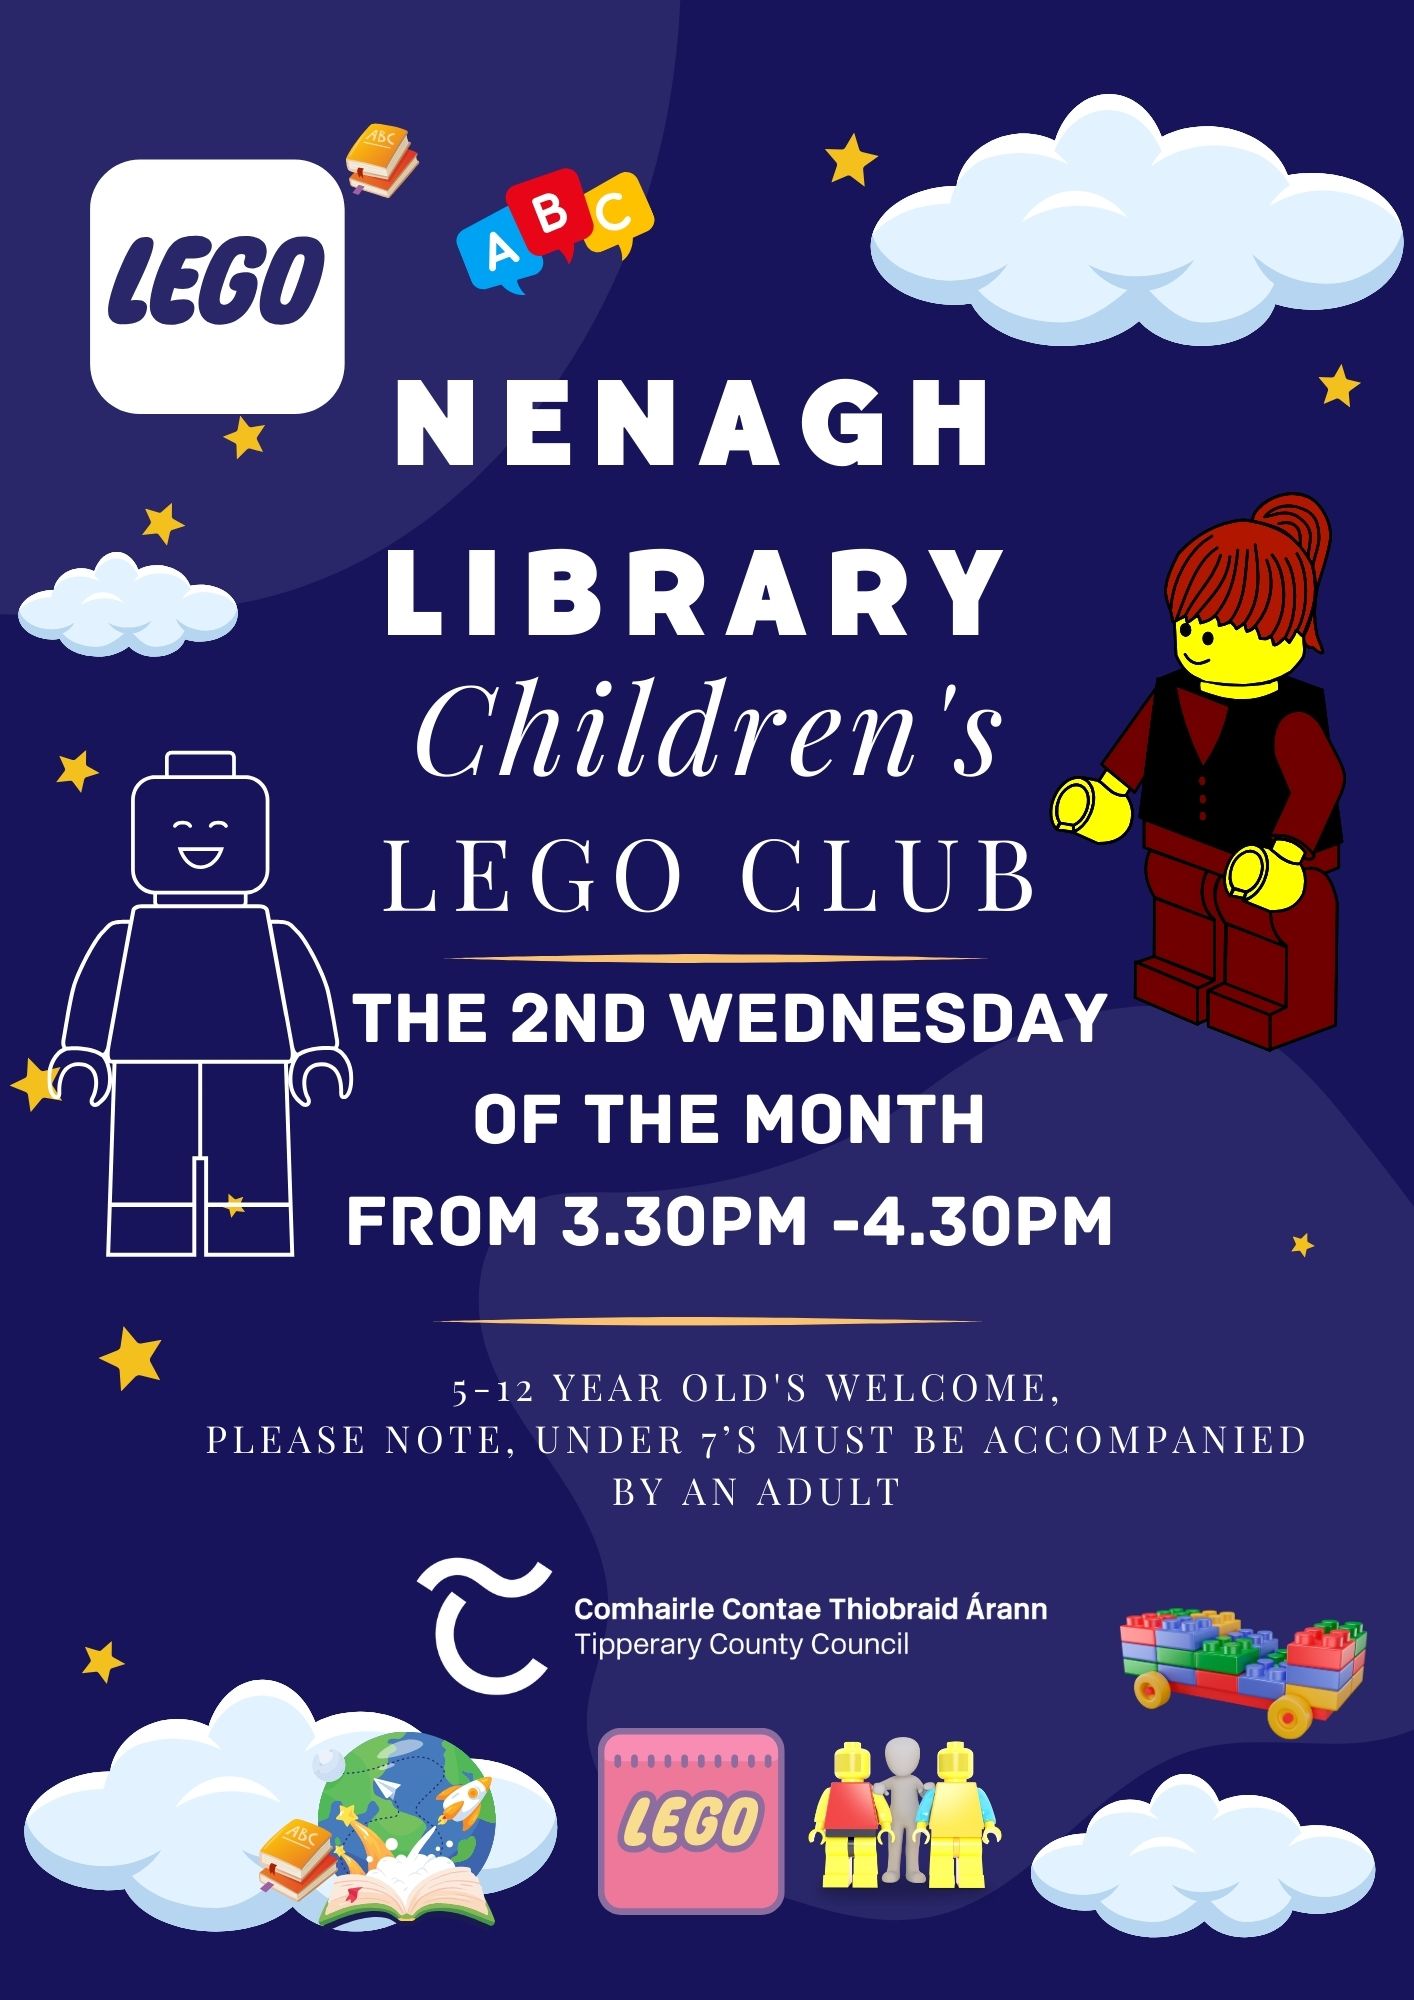 Nenagh Library Lego Club on the second Wednesday of the month. Our Lego Club meets from 3.30pm to 4.30pm. The club is suitable for ages 5 to 12 years old. Please note, under 7s must be accompanied by an adult.